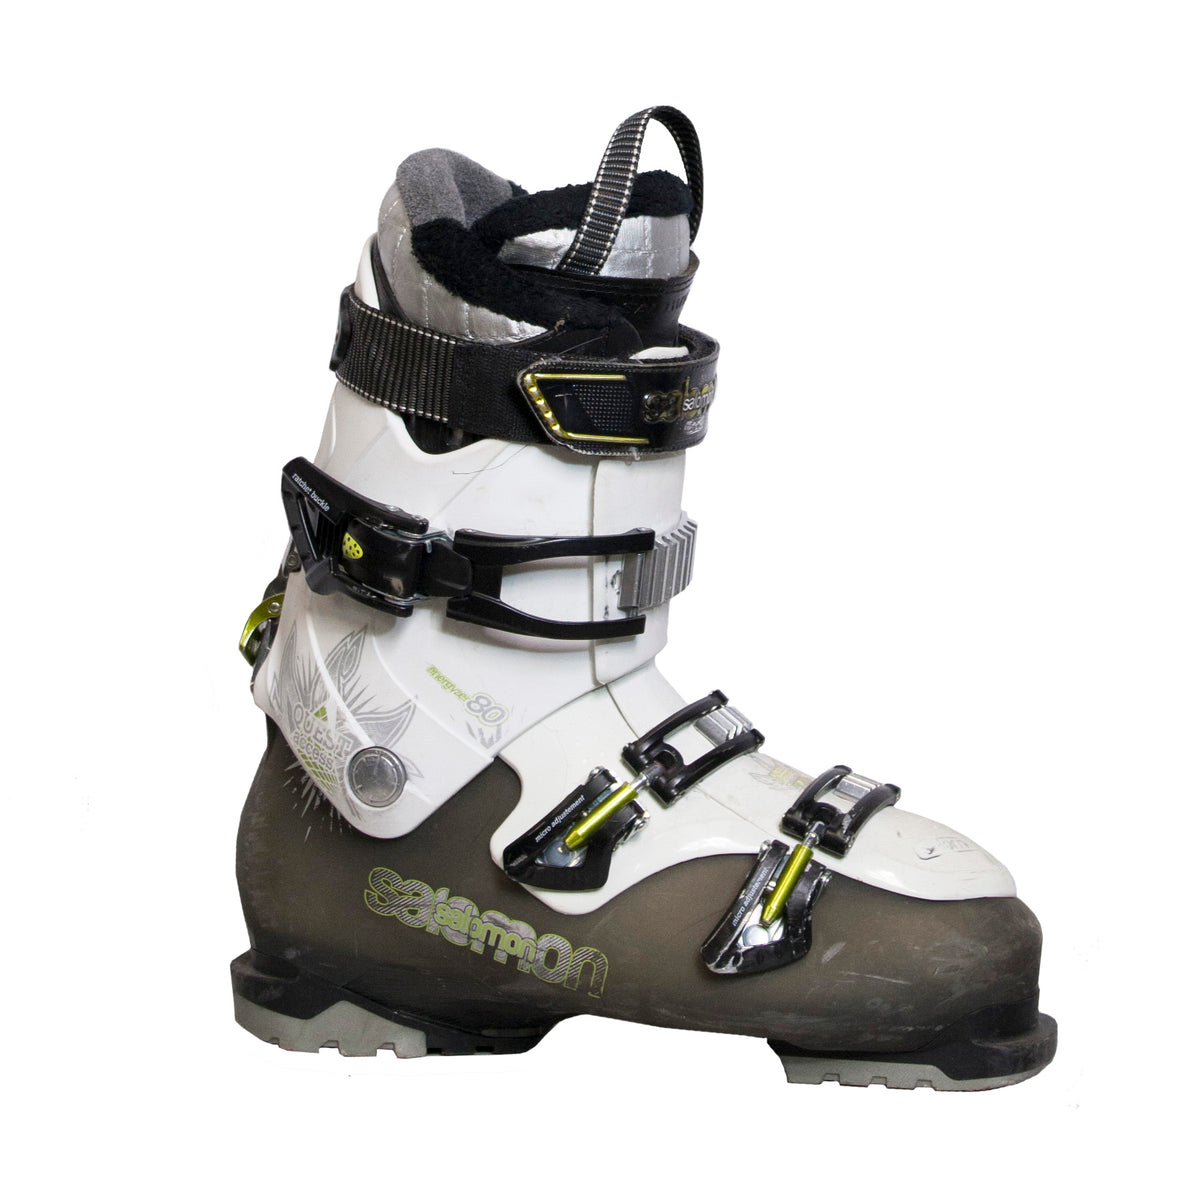 Used Access 80 Ski Boots - Snow Sports